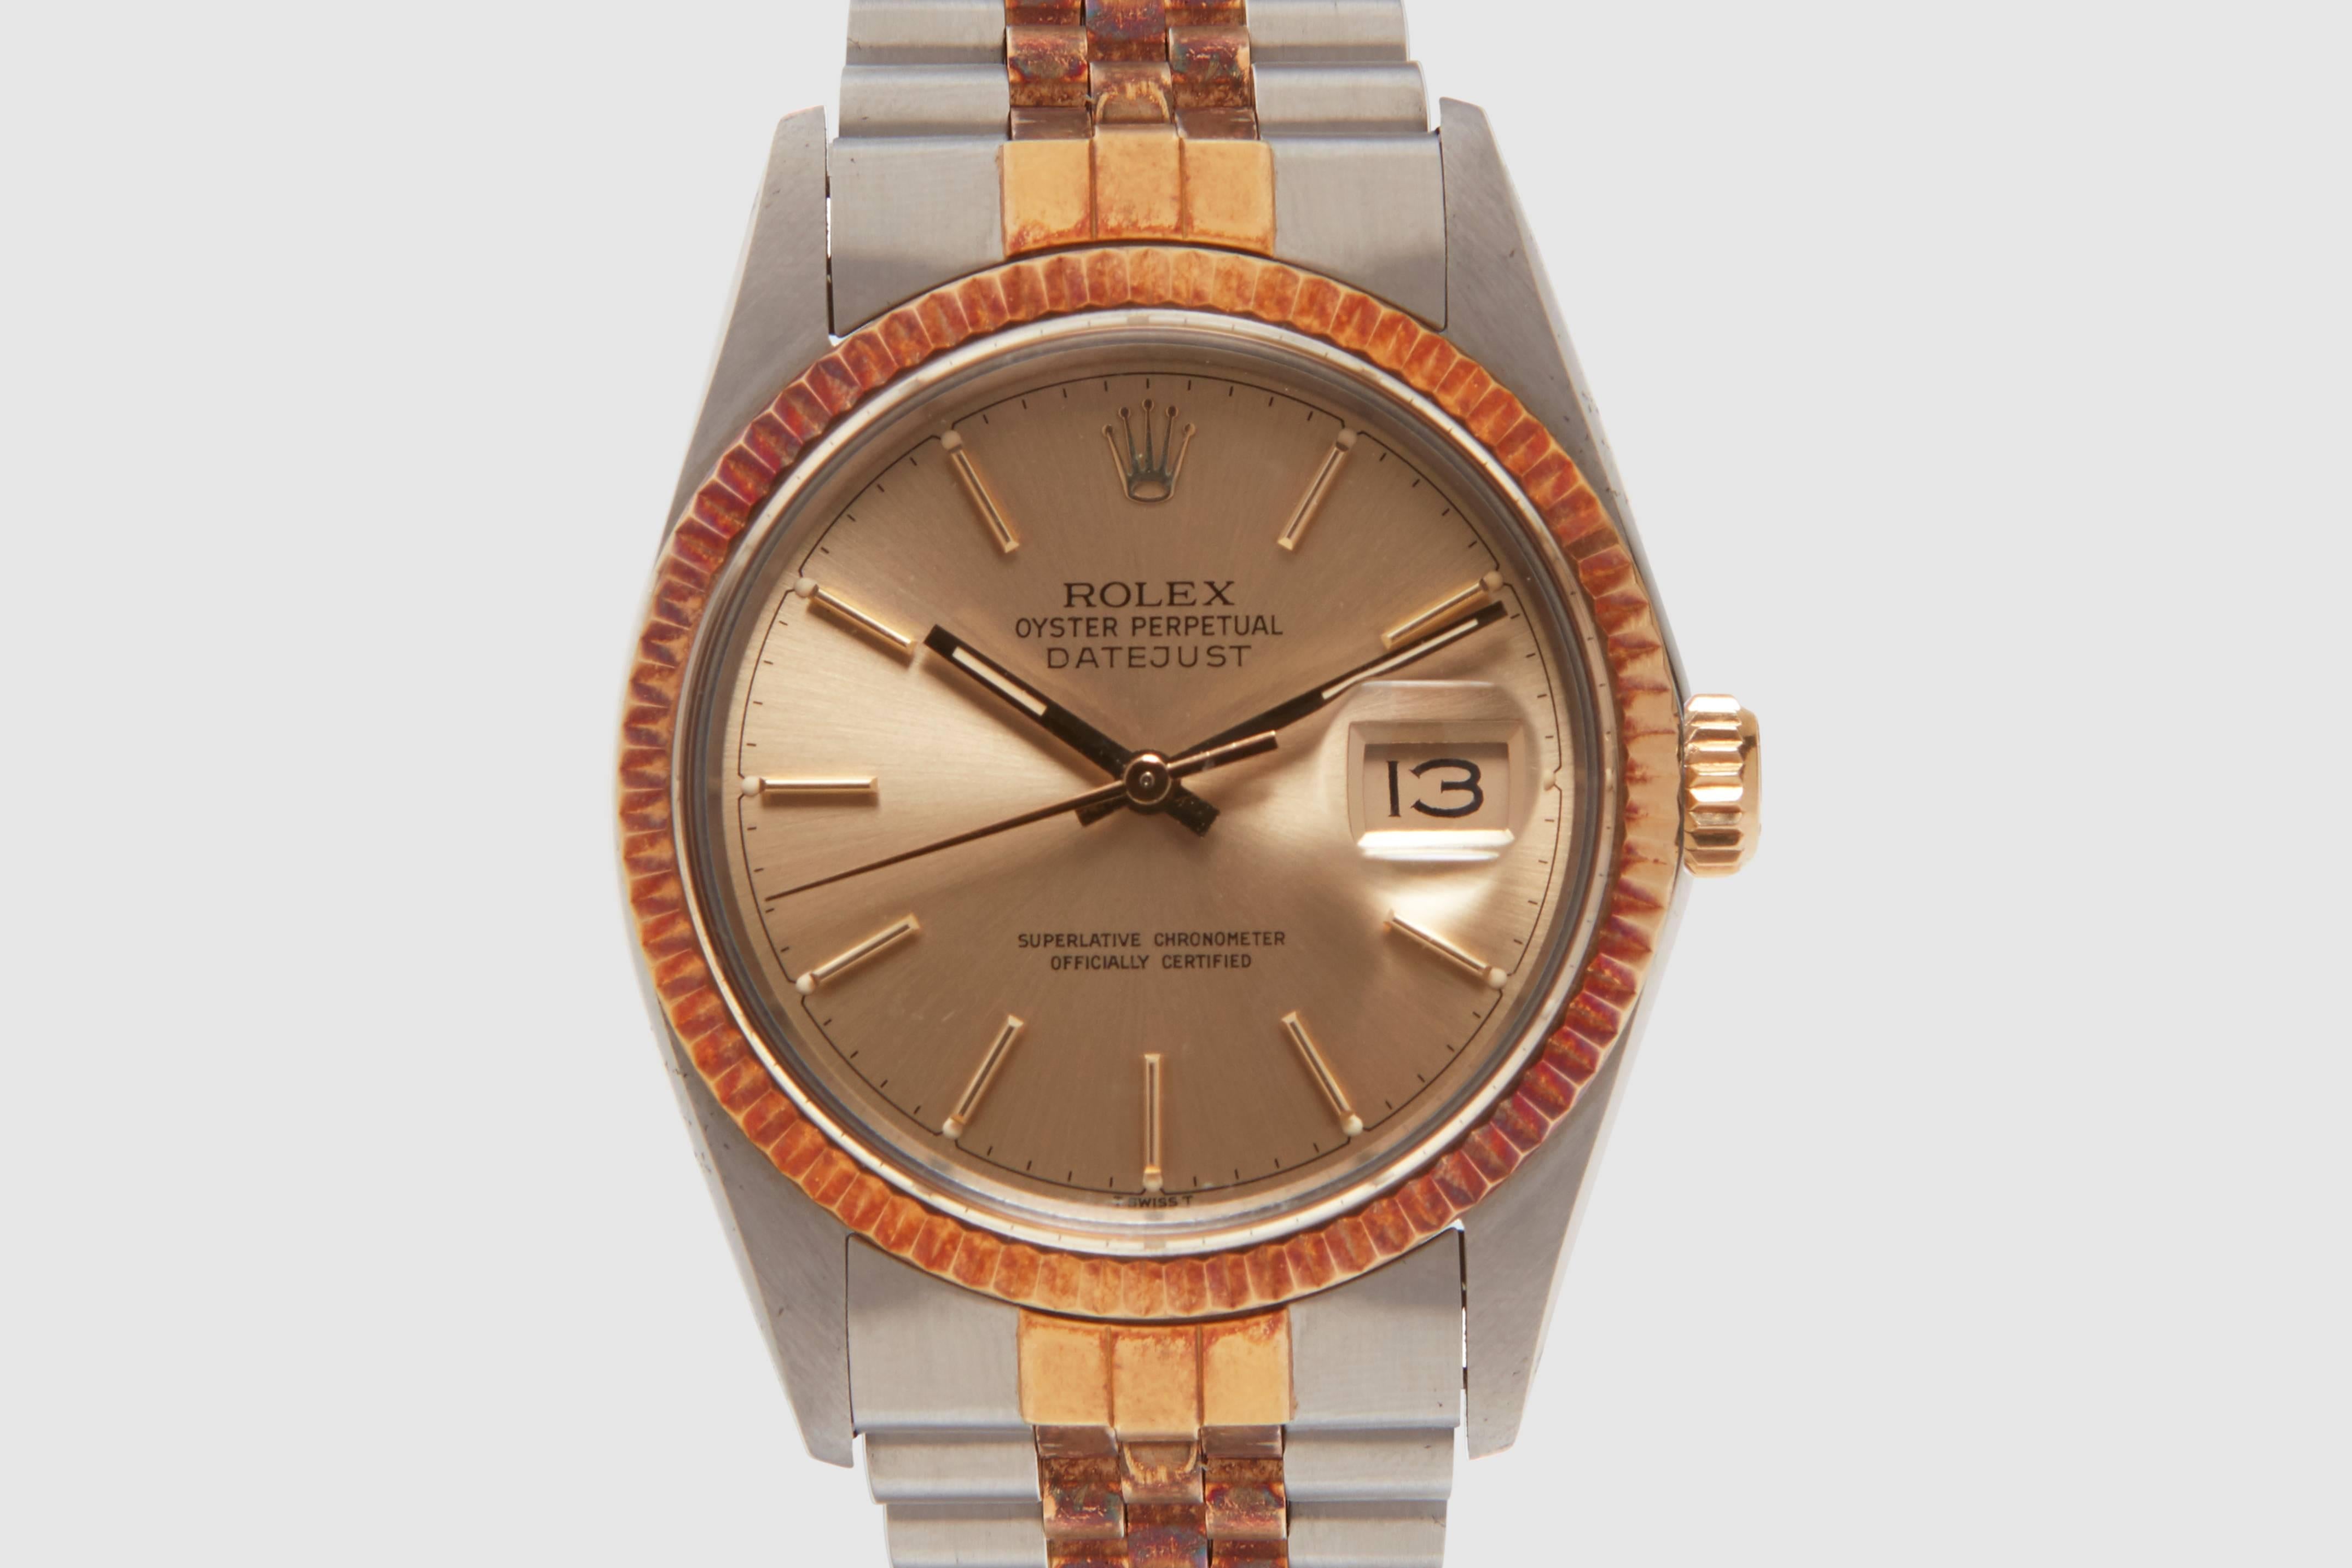 A stainless steel and eighteen carat gold Rolex Oyster Perpetual Datejust reference 16013. The watch is powered by a Rolex, Swiss made, twenty seven jewel automatic calibre 3035 movement that powered all of the acrylic crystal Datejust quick set